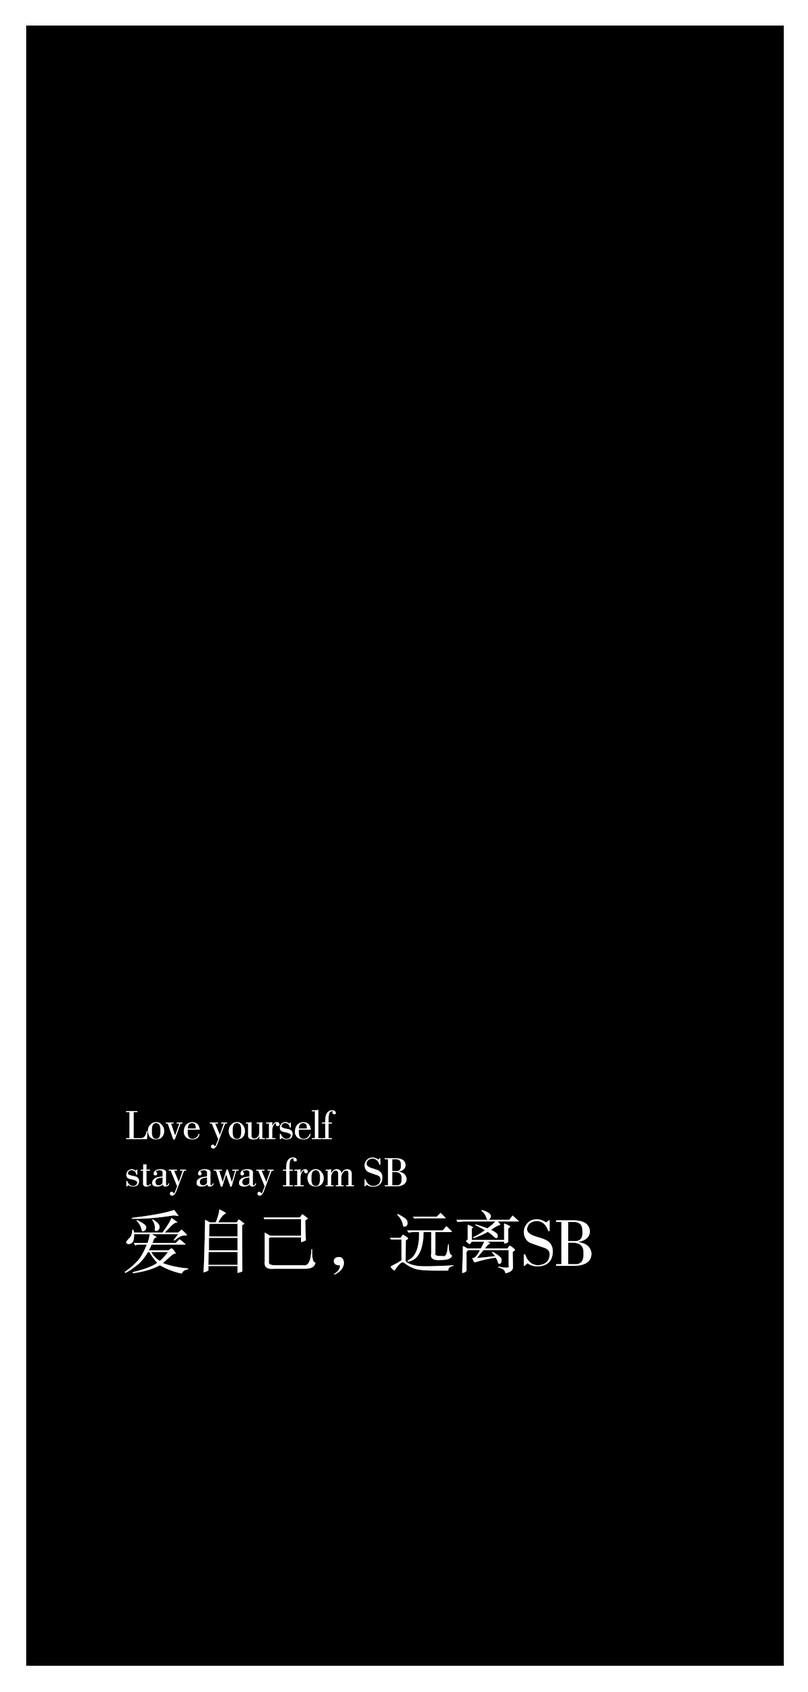 Wallpaper For Mobile Love Yourself